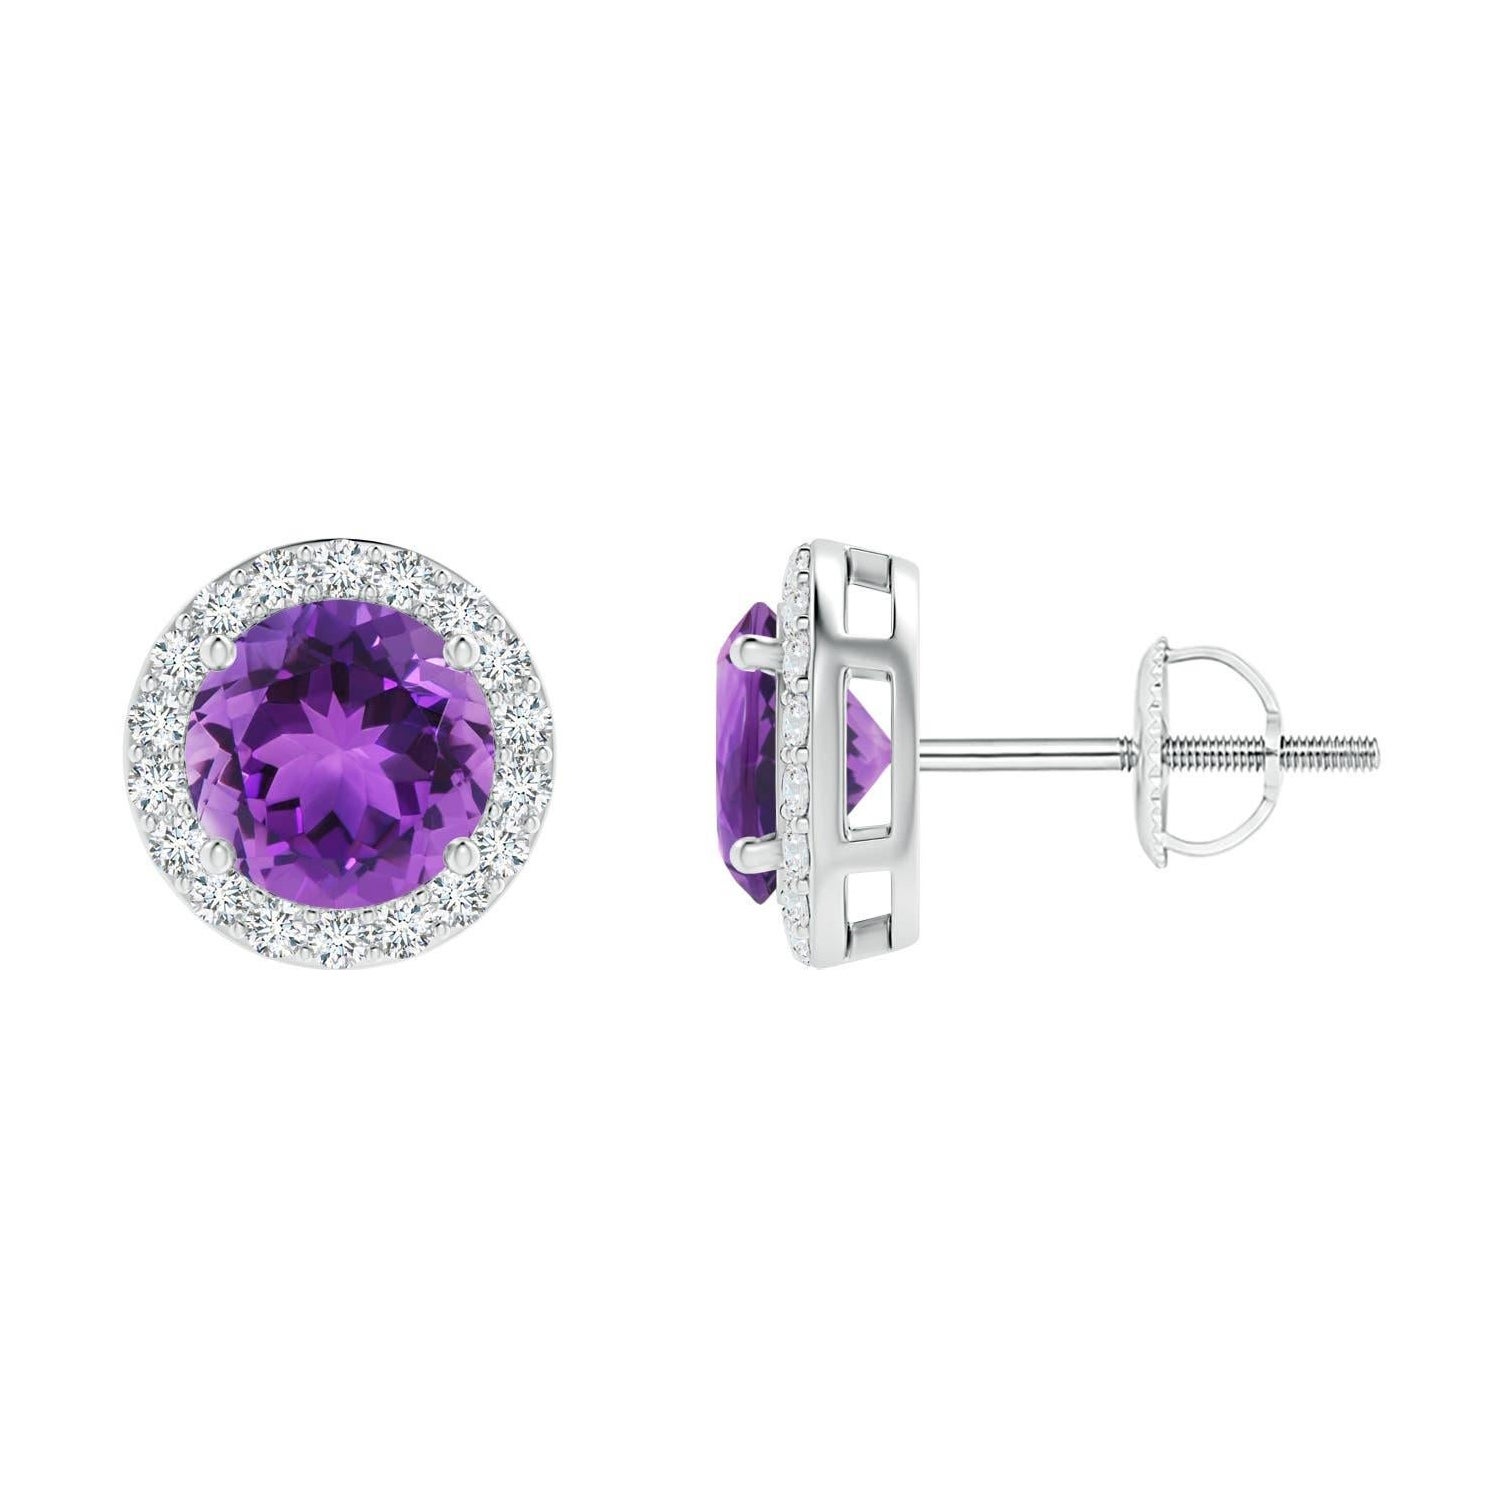 Natural Vintage Round 1.6ct Amethyst Halo Stud Earrings in 14K White Gold For Sale